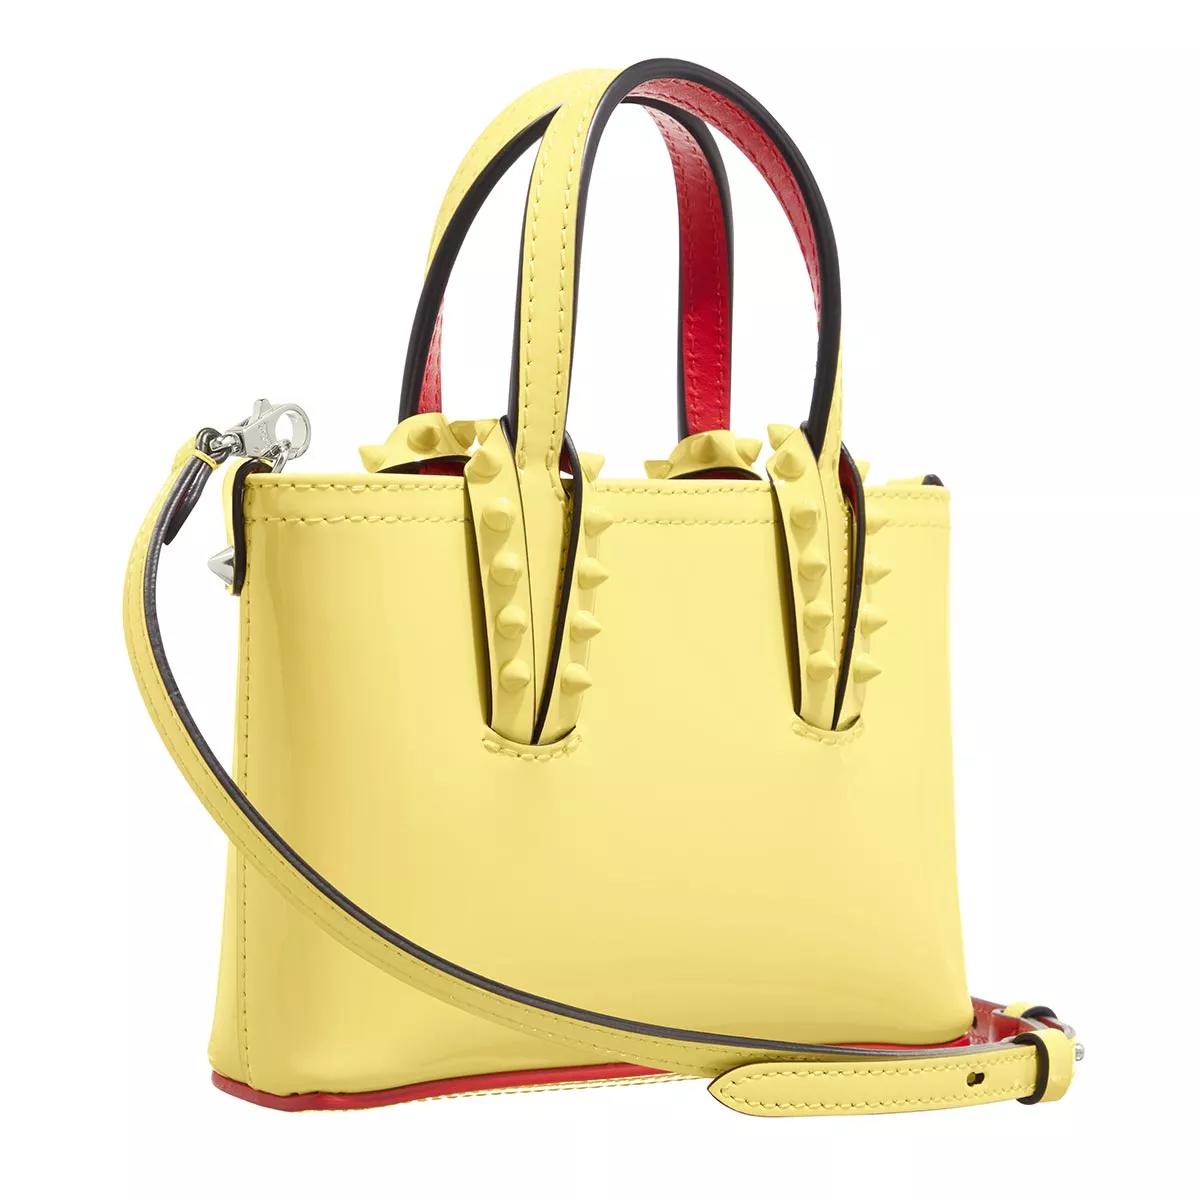 Cabata Patent Leather Tote Bag in Yellow - Christian Louboutin